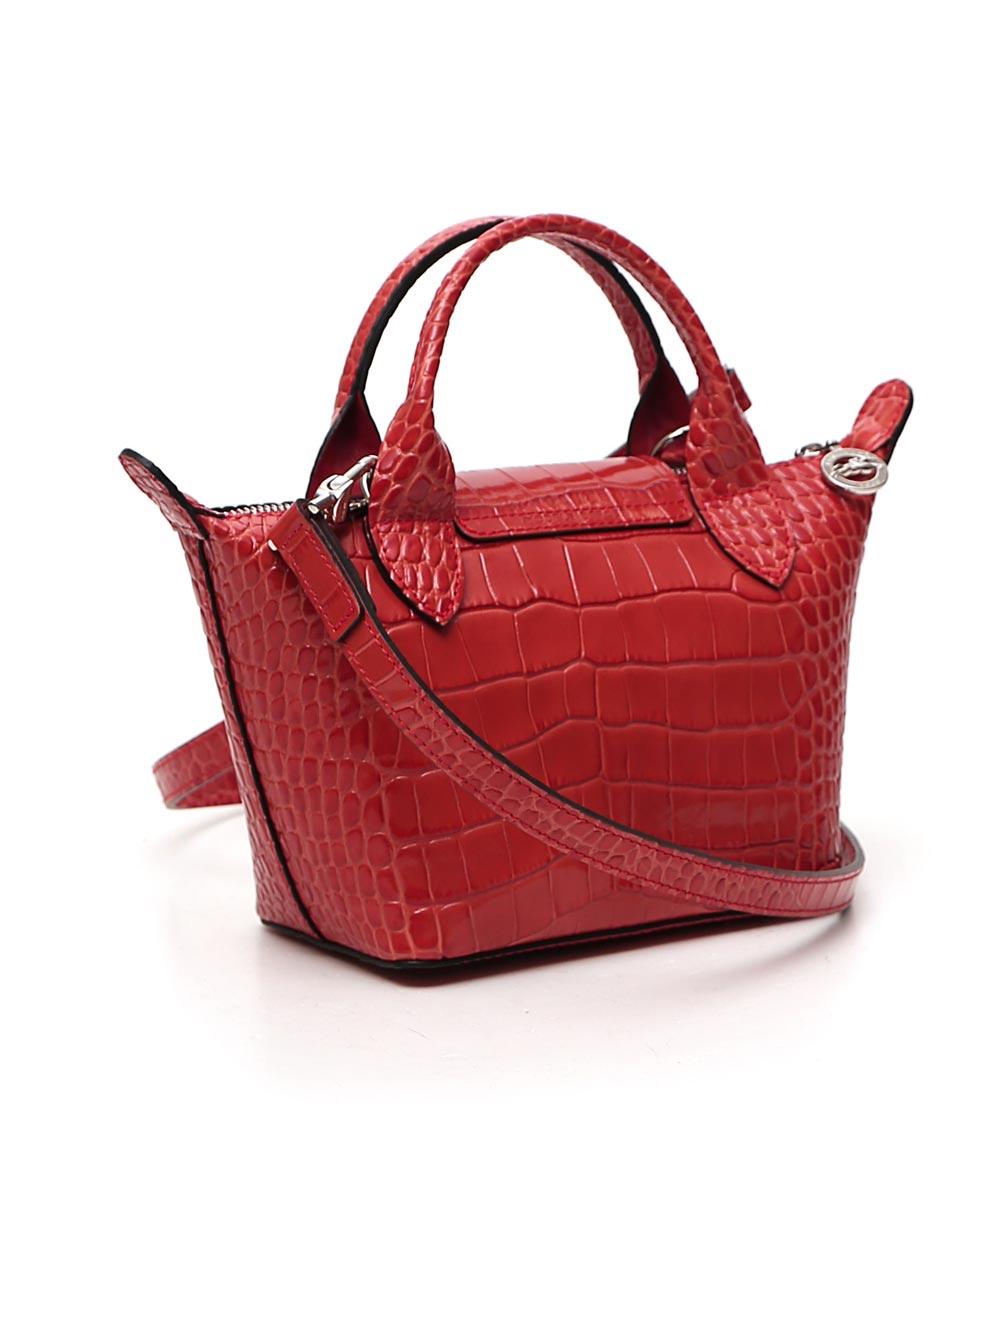 Longchamp Le Pliage Cuir Xs Top Handle Bag in Red